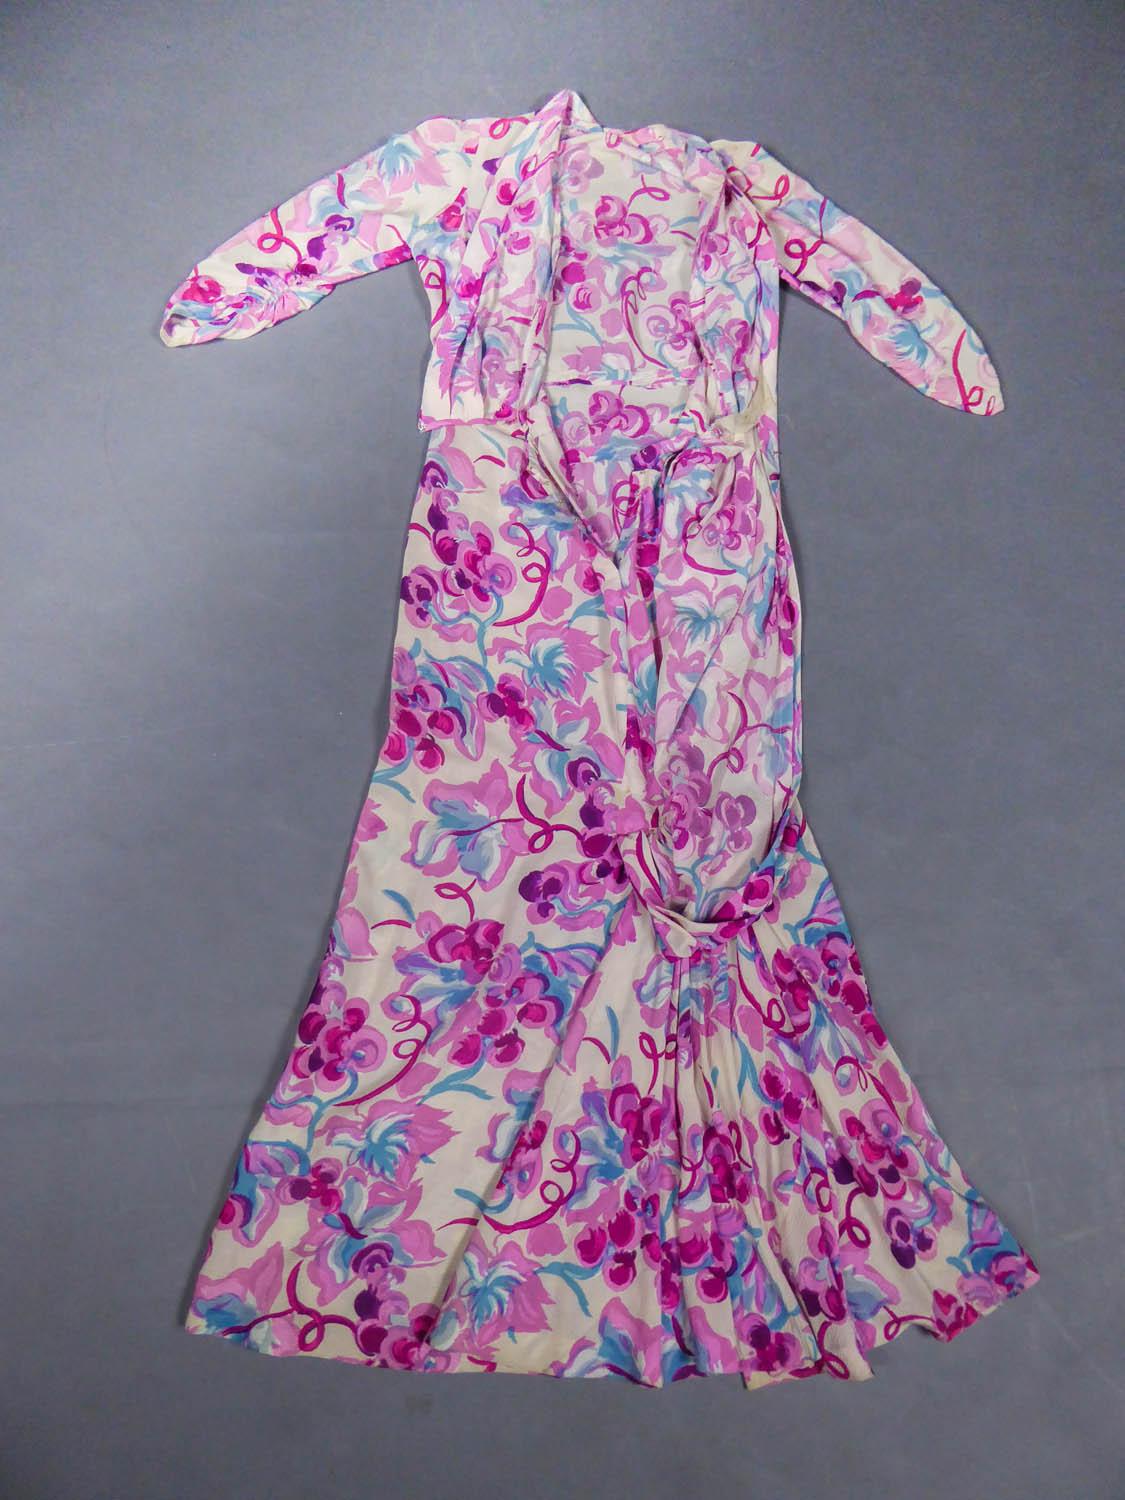 Circa 1940
France

Summer dress in cream silk crepe with patterns of grapes in pink, fuchsia, aubergine and sky blue. Sleeves three-quarter, closes on the front by a drape effect. Slightly damaged on the closure of the dress, otherwise very good